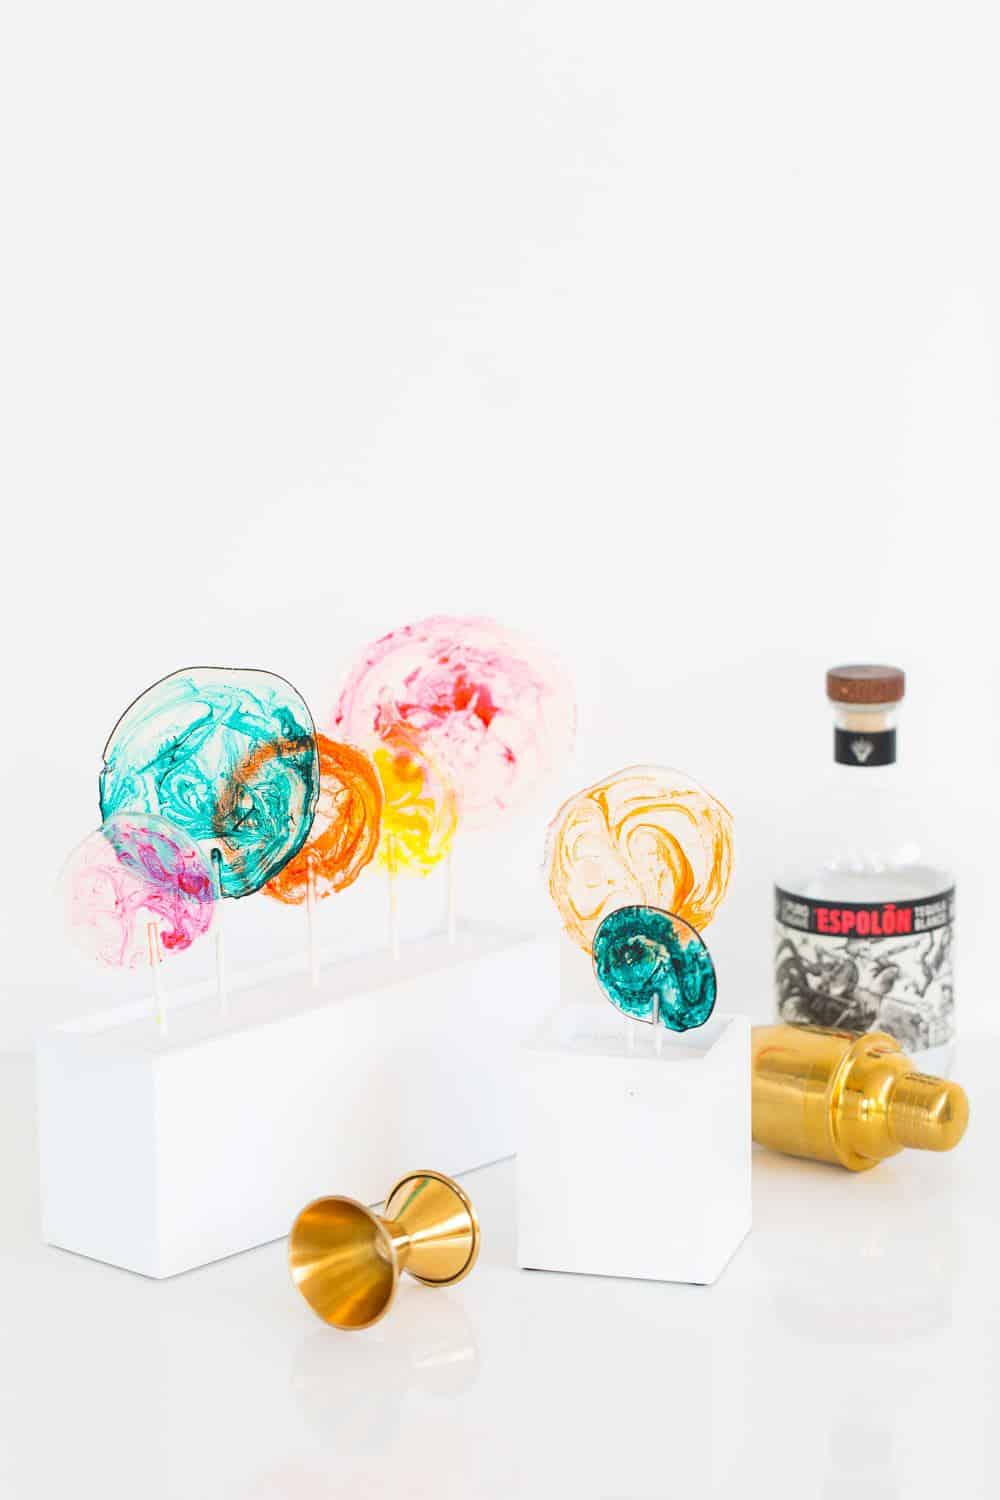 DIY Marble Spiked Lollipops by Sugar & Cloth Top Houston Lifestyle Blogger Ashley Rose #lollipops #diy #recipe #marble #spiked #tequila #alcohol #adult #candy #sweets